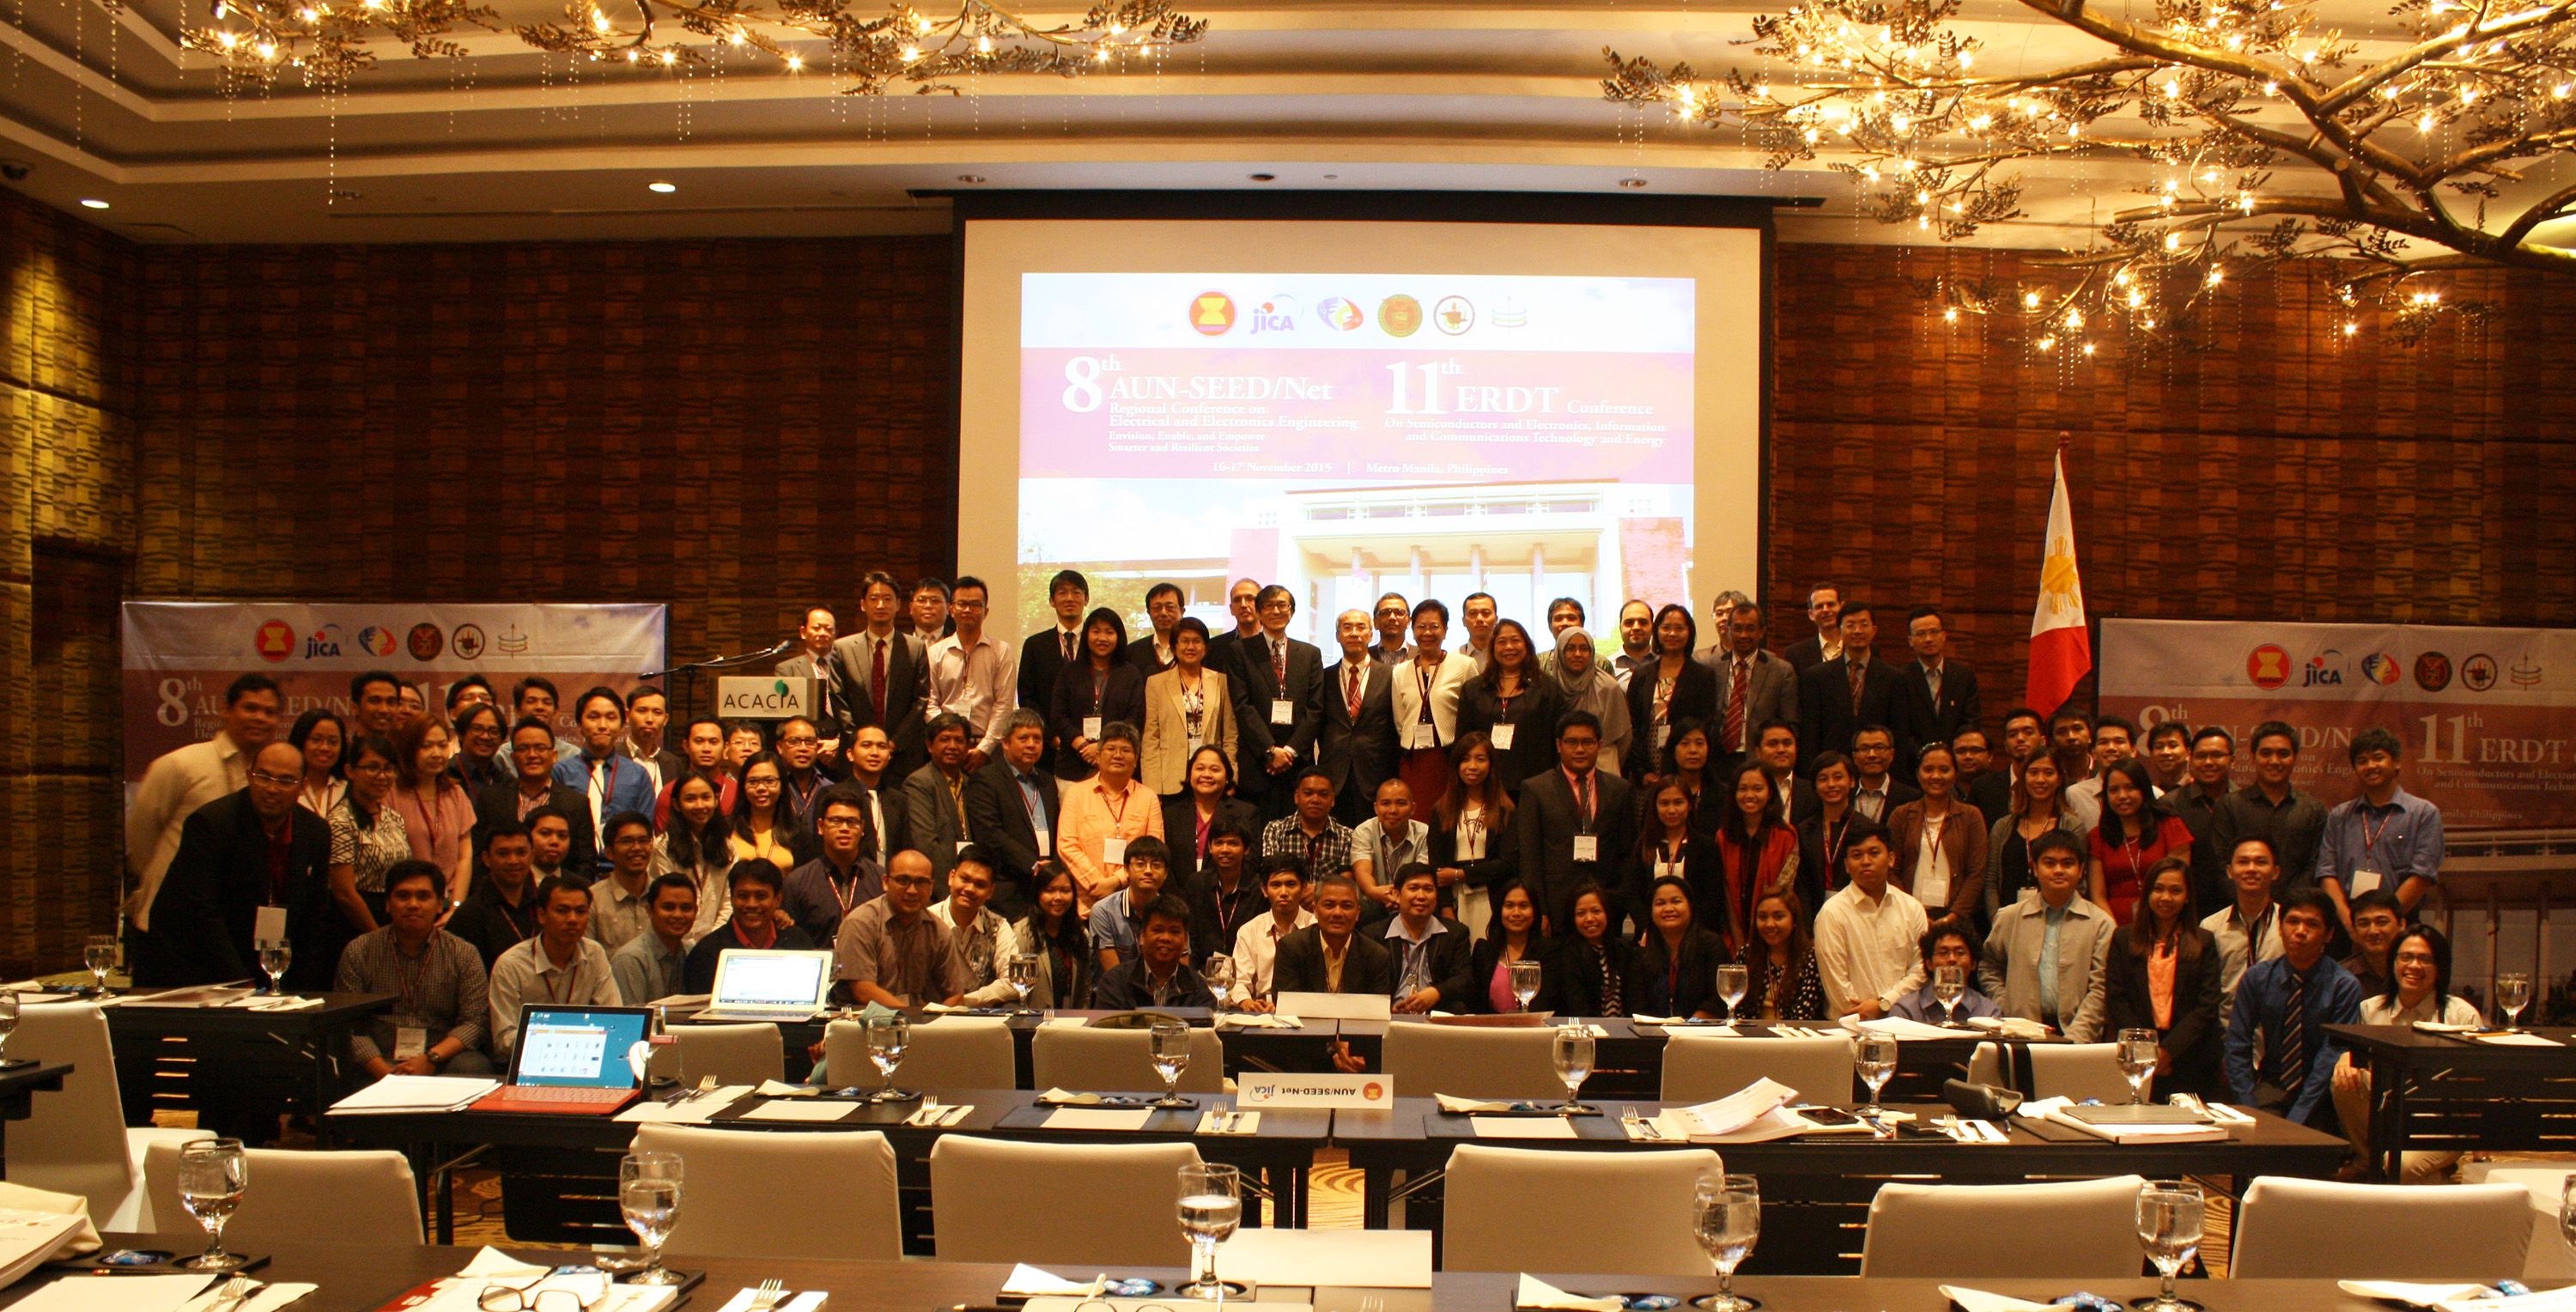 8th-aun-seed-net-rceee-2015-and-11th-erdt-conference